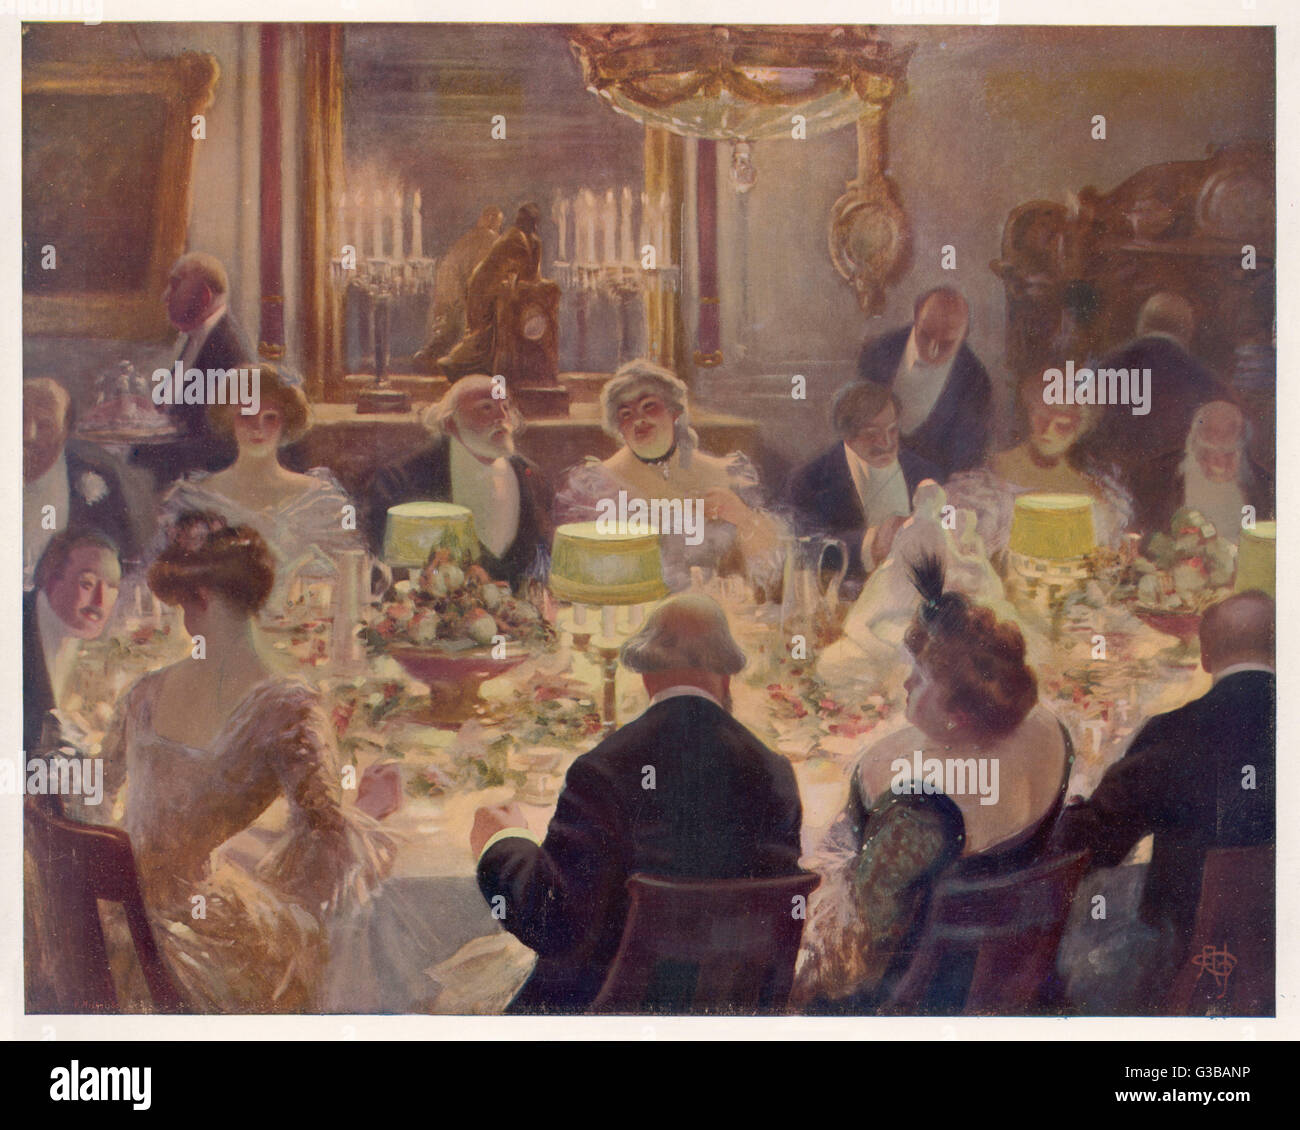 A lavish dinner party takes  place in a French household.         Date: 1904 Stock Photo